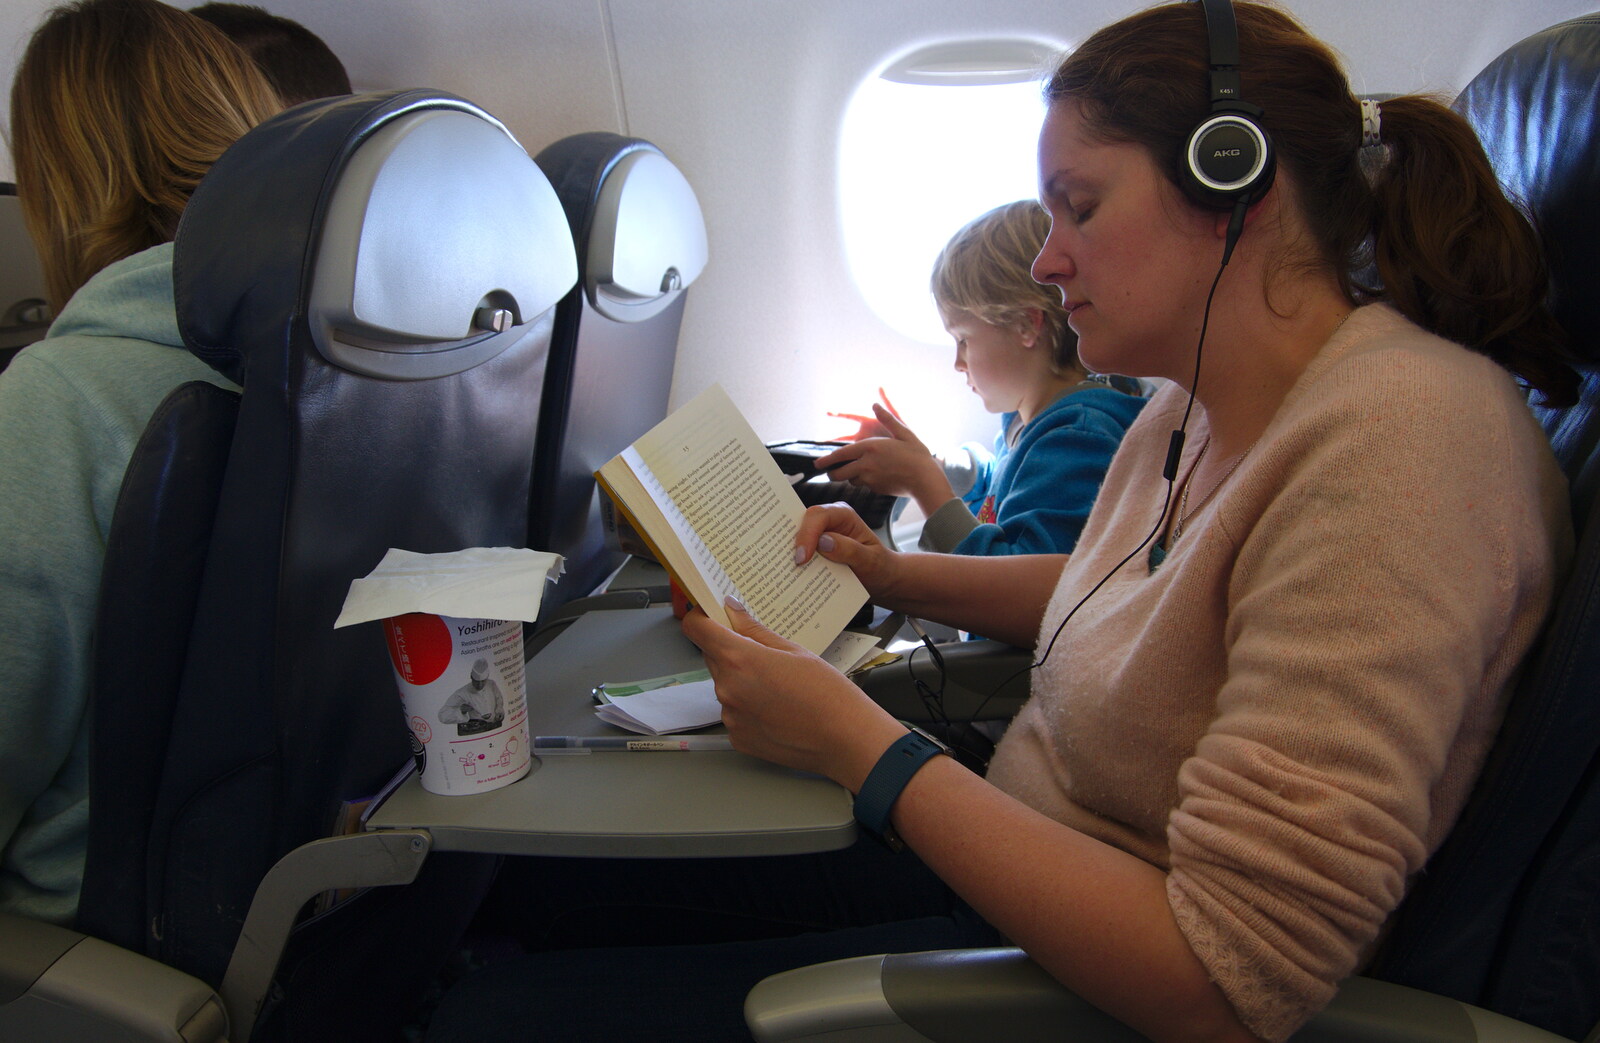 Isobel reads a book on the plane from An Easter Parade, Nerja, Andalusia, Spain - 21st April 2019